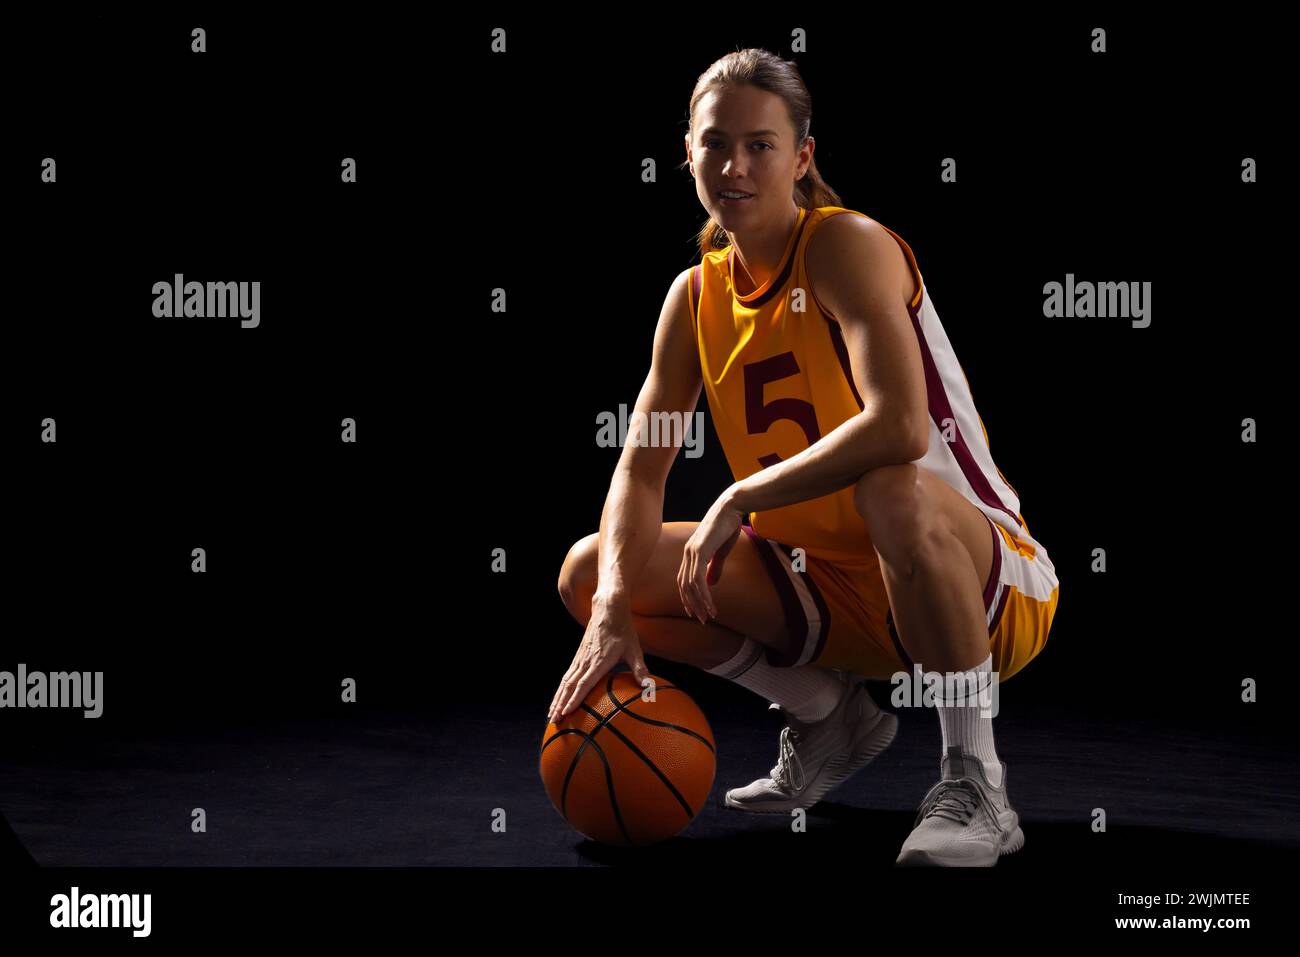 Athletic young woman in basketball gear poses with focus on black background. Stock Photo